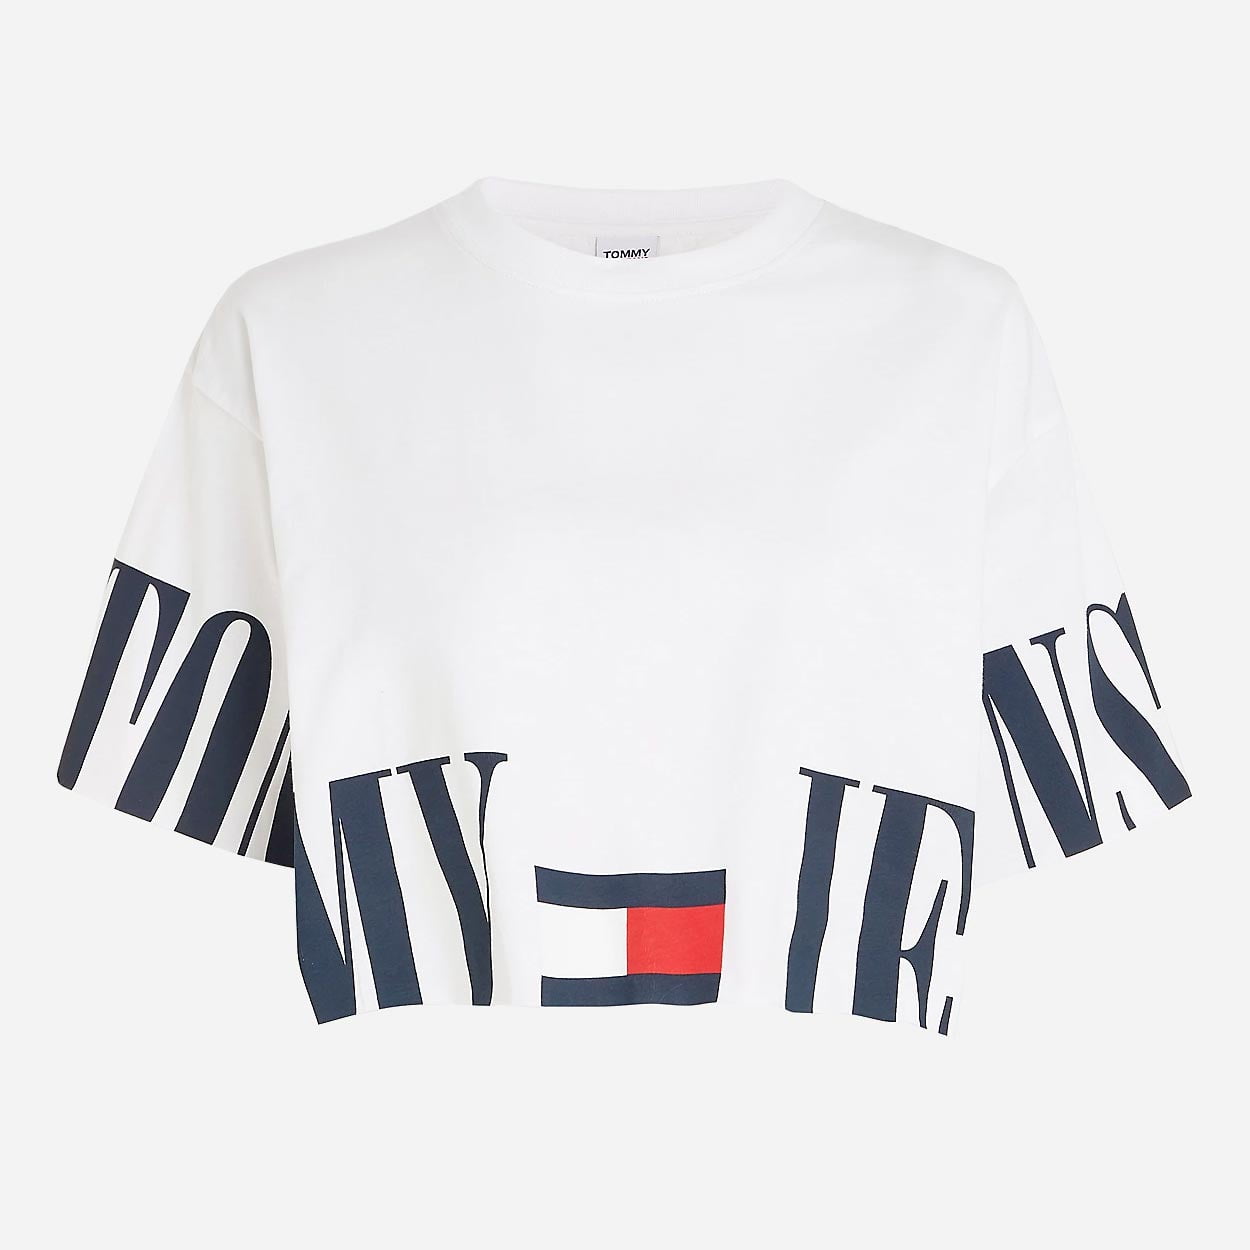 Tommy Jeans Women's Crop Archive 2 Tee - White